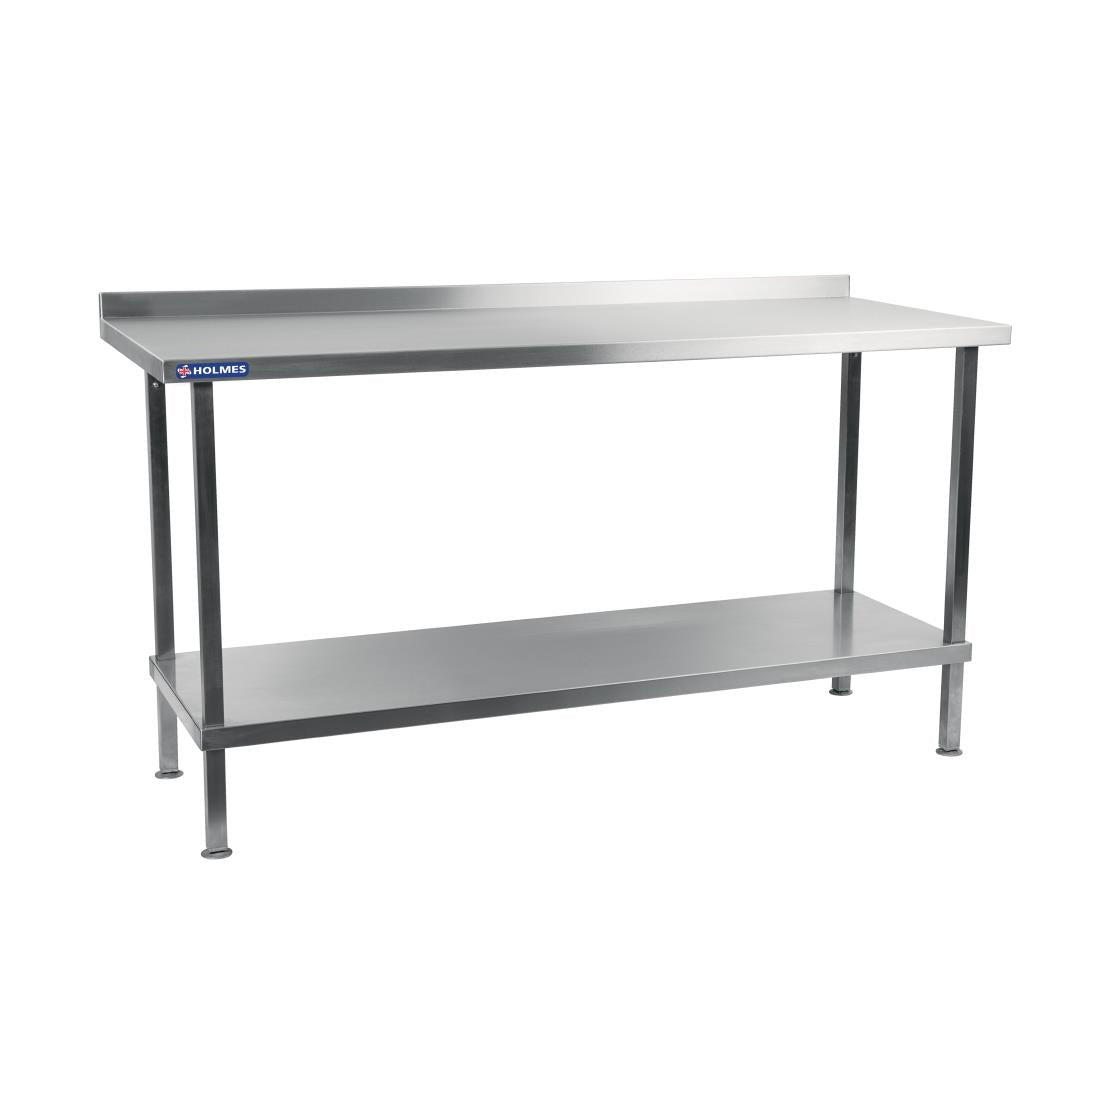 DR025 Holmes Stainless Steel Wall Table with Upstand 2100mm JD Catering Equipment Solutions Ltd